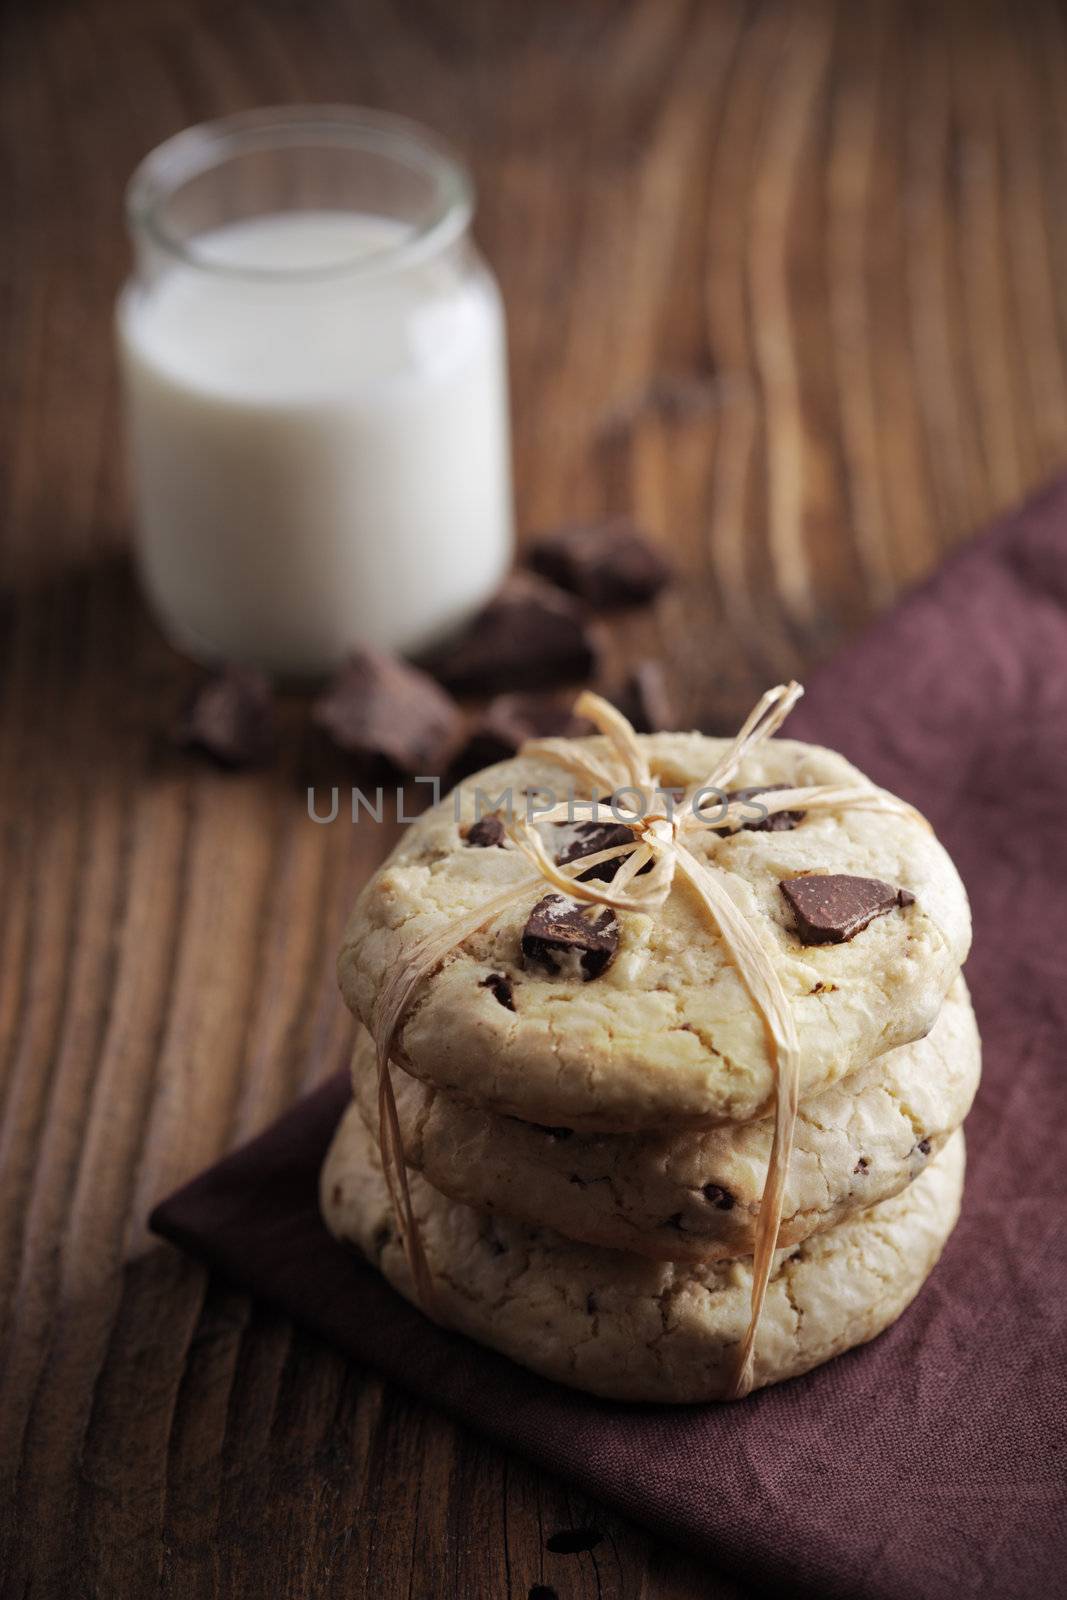 Chocolate chip cookies  by stokkete